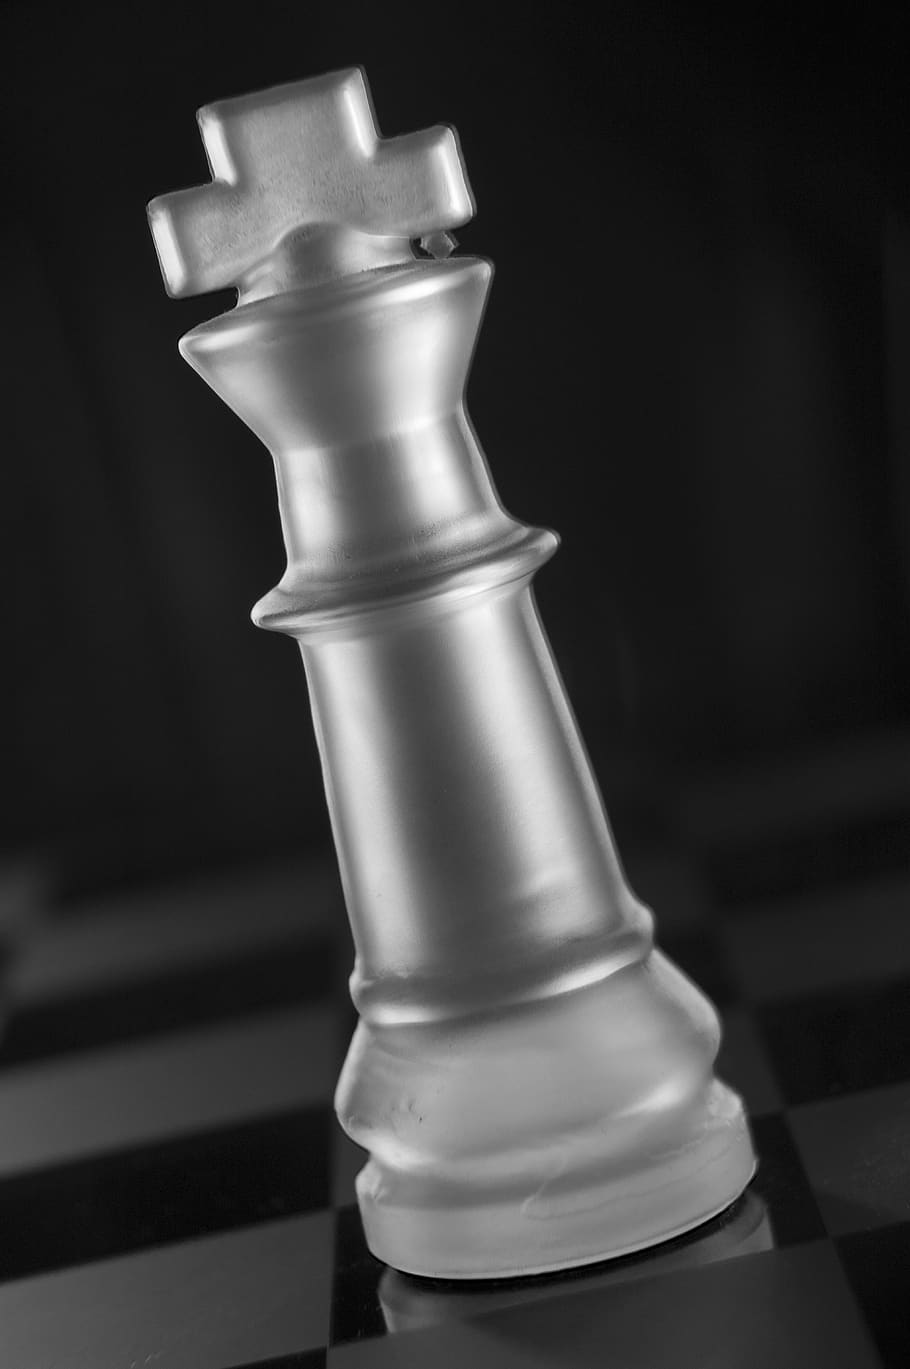 chess, victory, checkmate, king, chessboard, strategy, crown